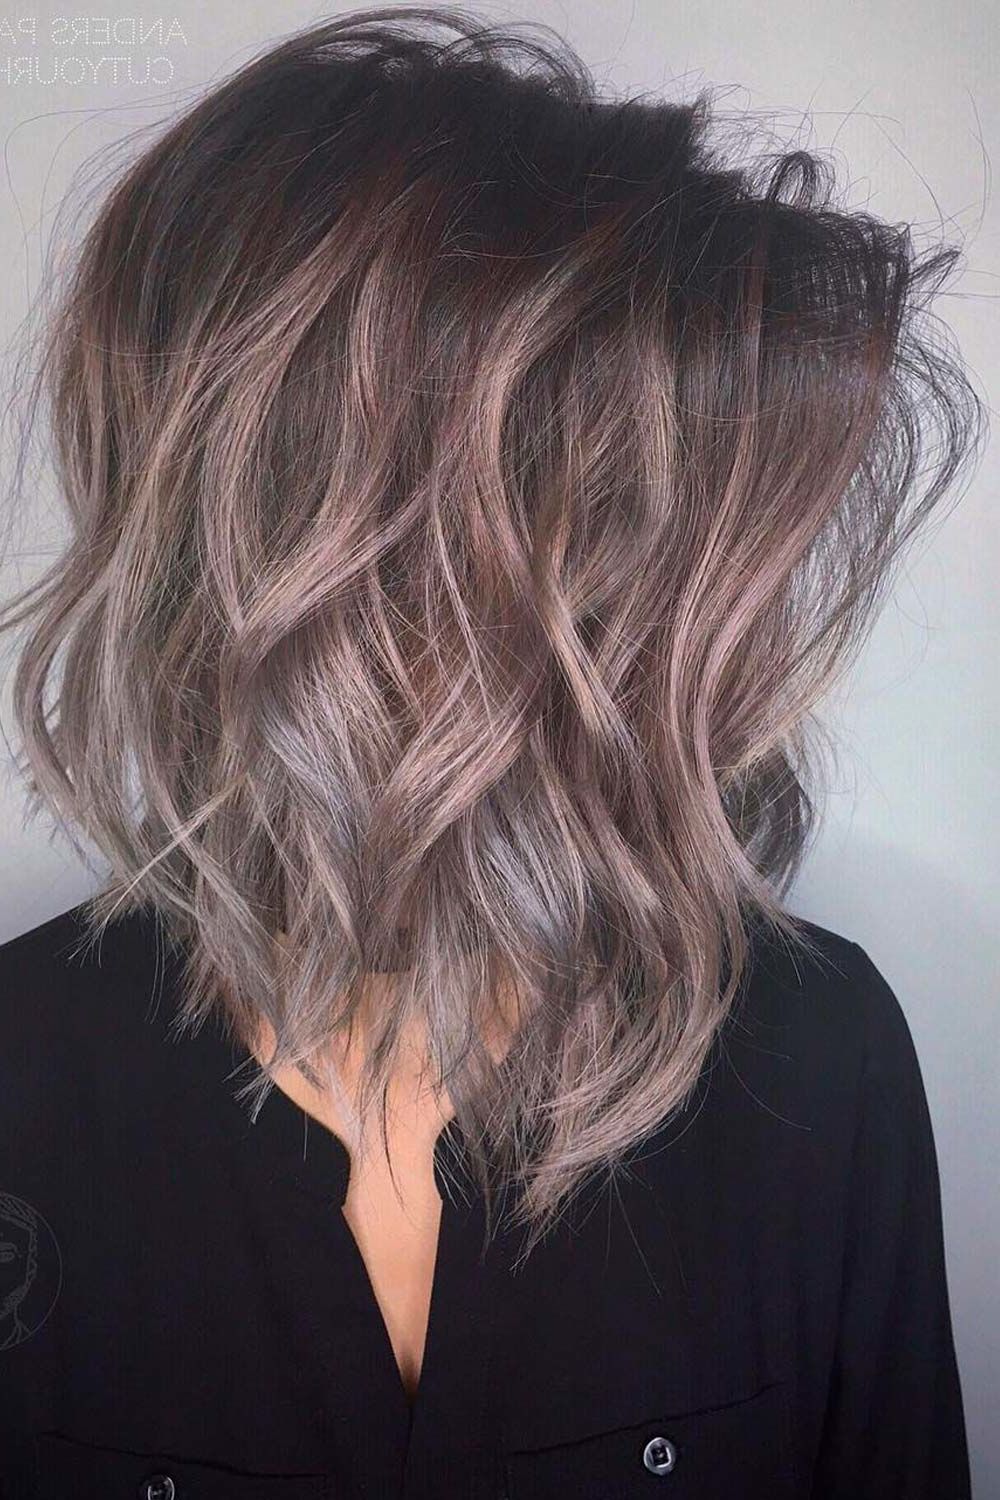 Untraditional Lob Haircut Ideas To Give A Try | Lovehairstyles With Best And Newest Brightened Brunette Messy Lob Haircuts (View 15 of 25)